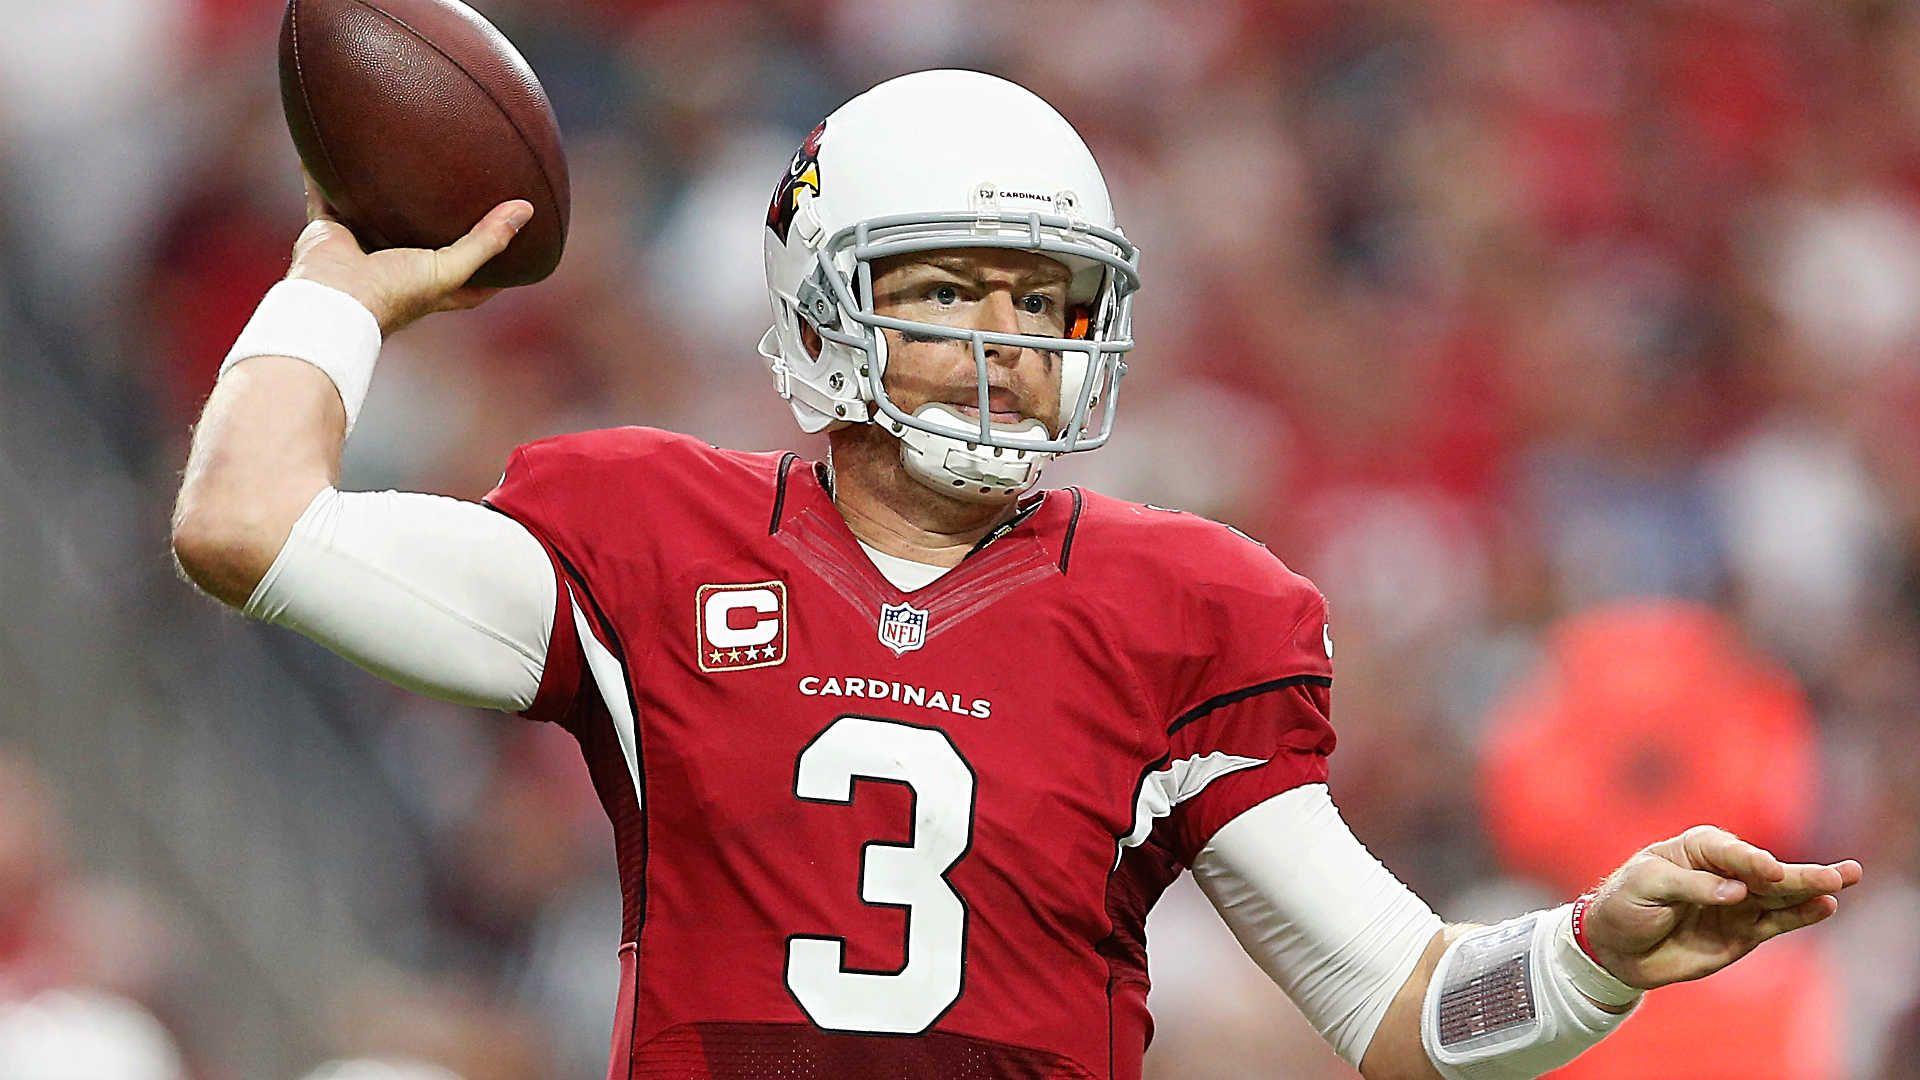 Cardinals' Carson Palmer has torn ACL, placed on IR. NFL